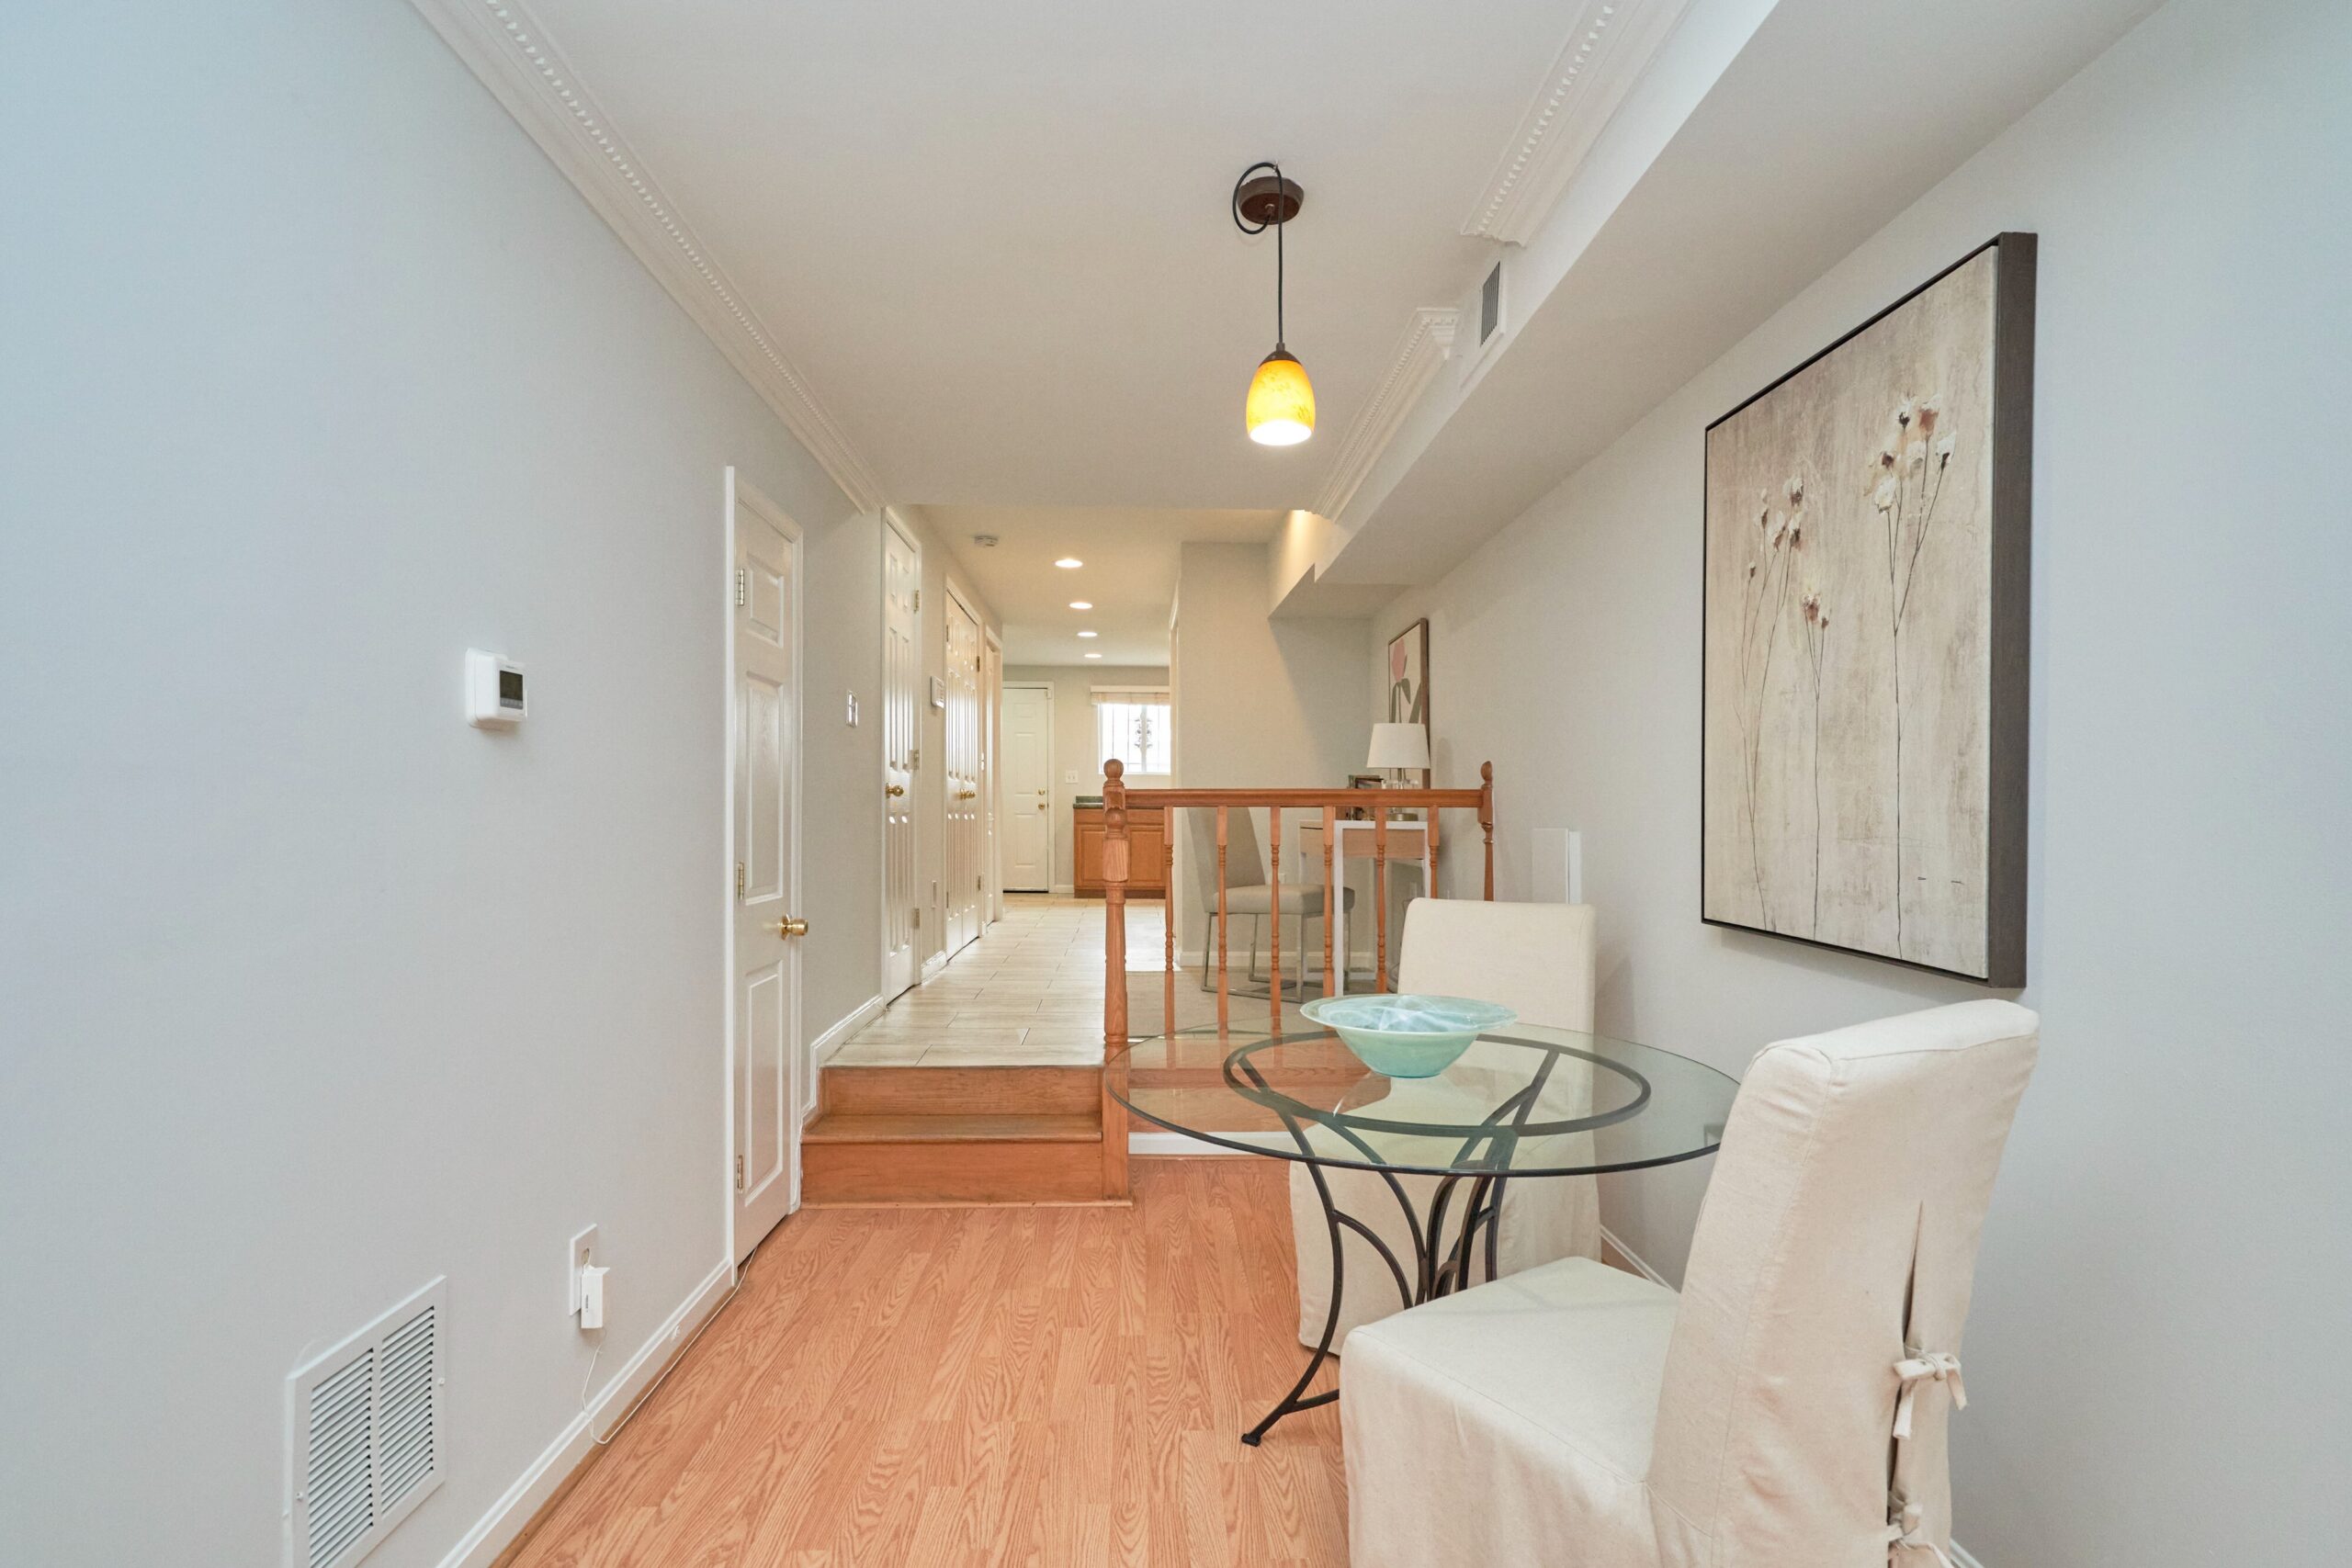 Professional interior photo of 1313 K Street SE, Washington, DC - showing the breakfast/dining space just before 2 steps up to an office space before the kitchen